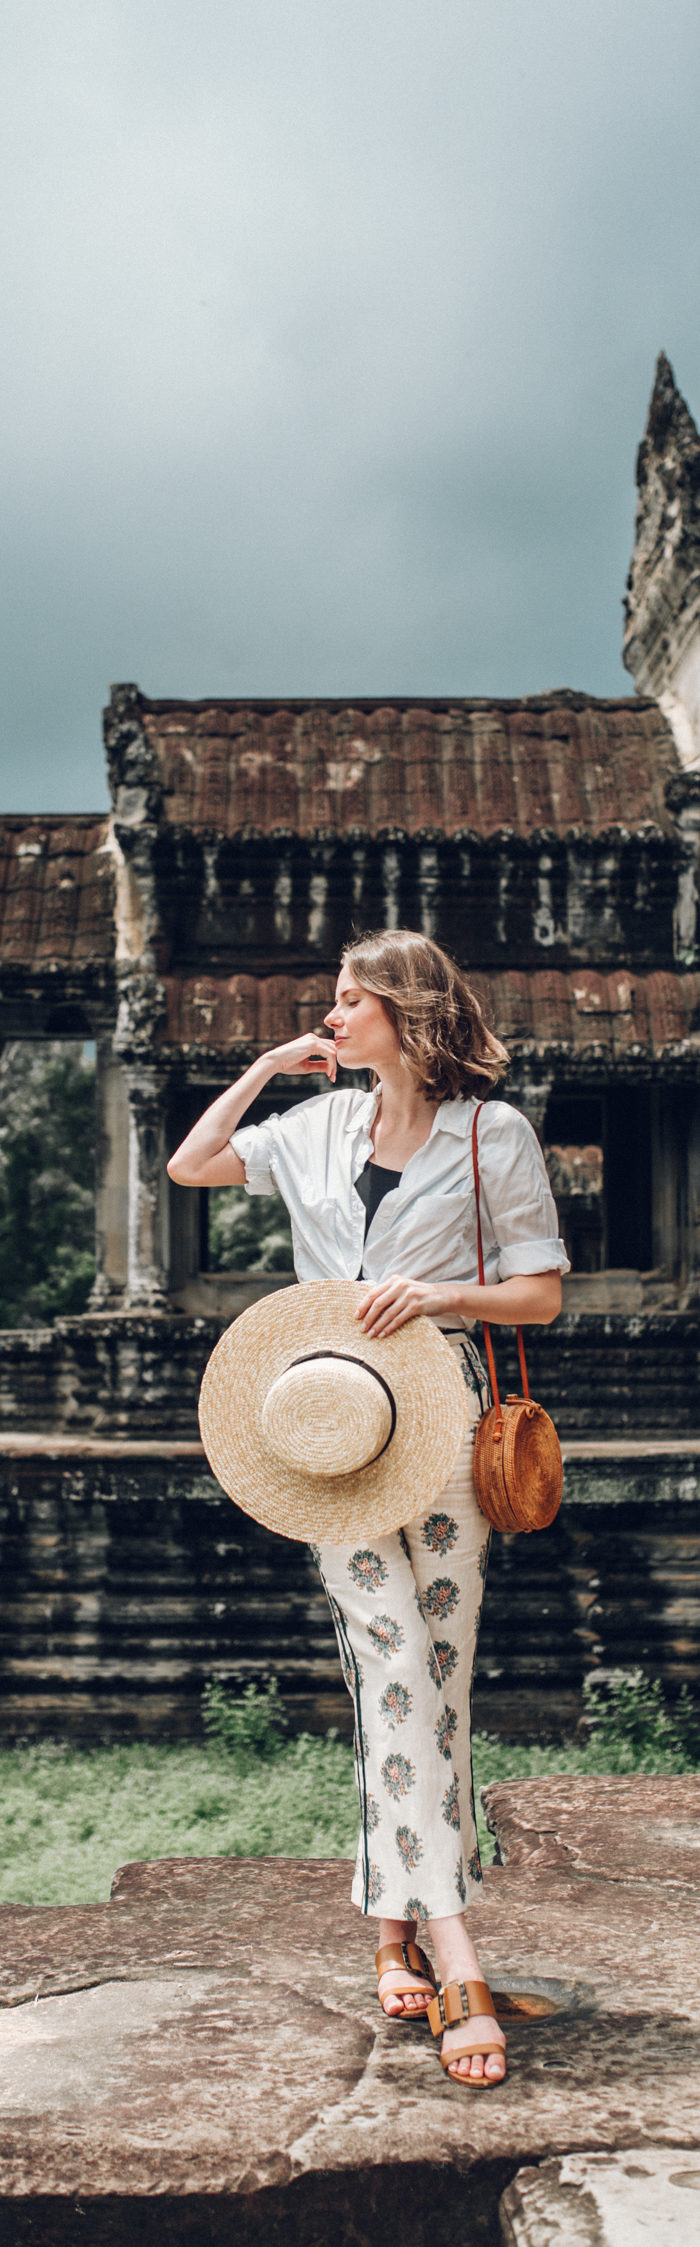 Miss USA 2011 Alyssa Campanella of The A List blog shares what to wear to Angkor Wat in Siem Reap, Cambodia